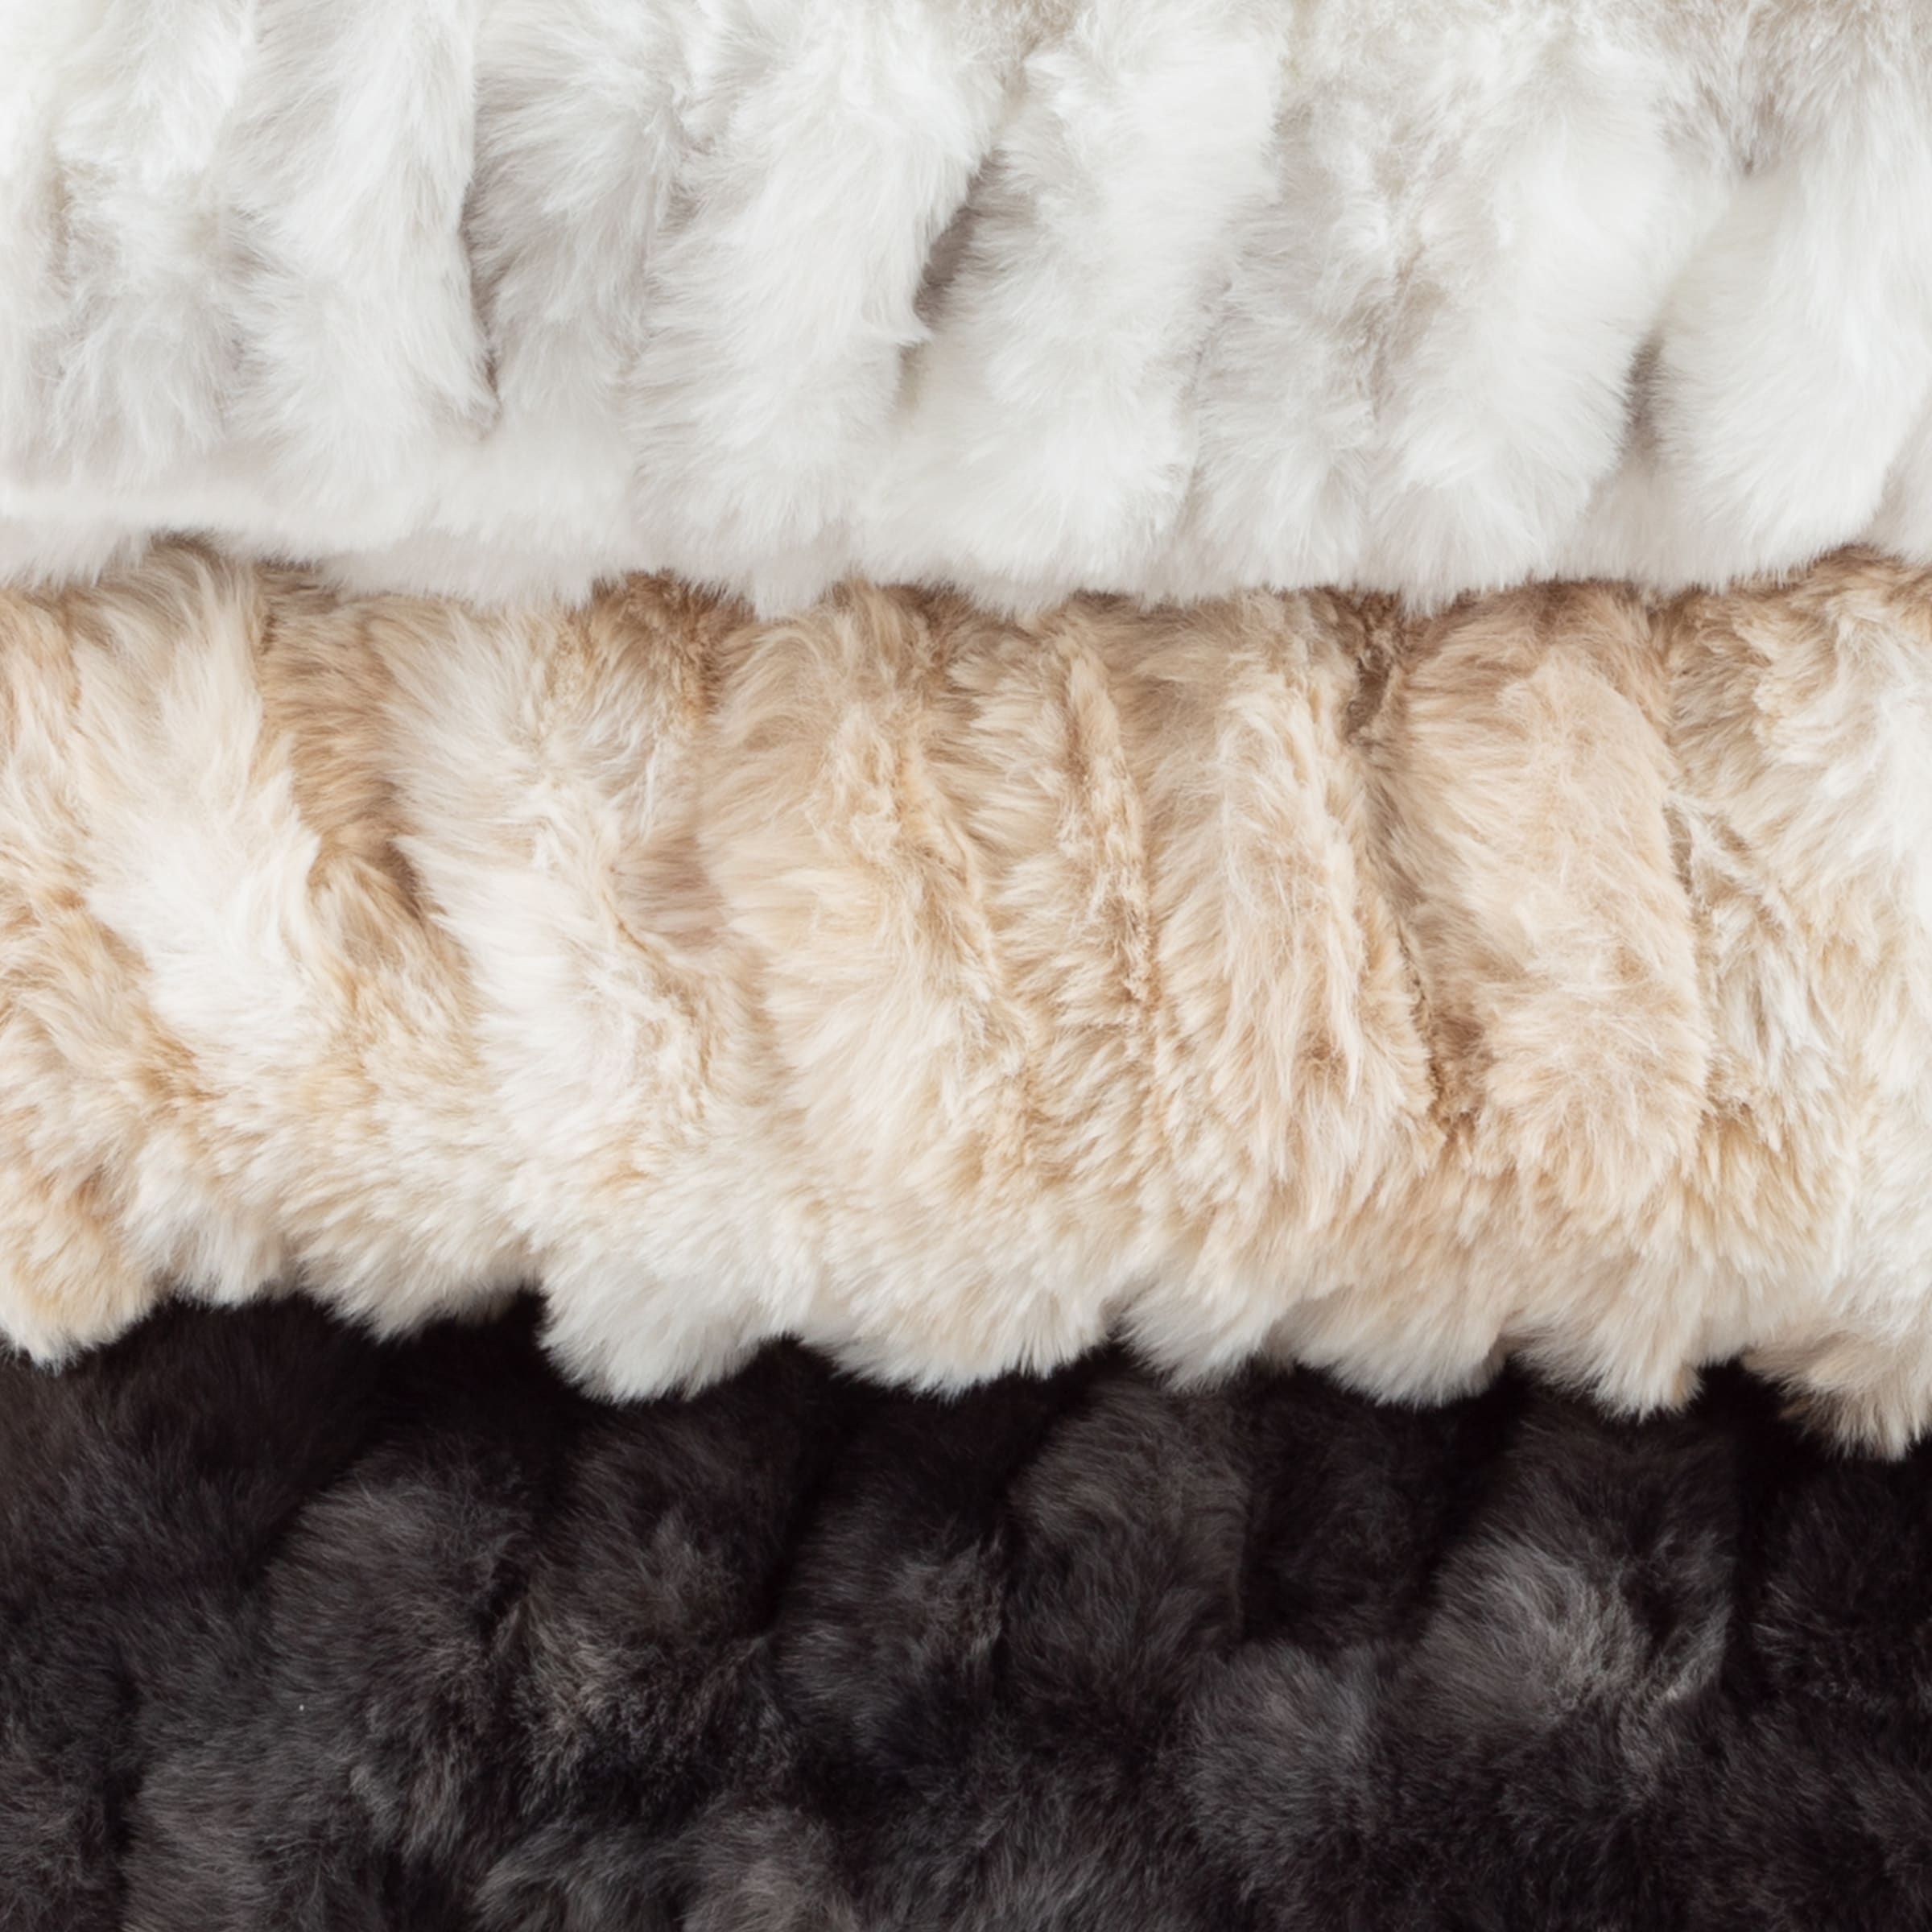 Oversized Ruched Faux Fur Blanket - 60x80-inch Jacquard Faux Fur Queen-size  Throw For Sofas And Beds - Luxurious Bedding By Lavish Home (black) : Target